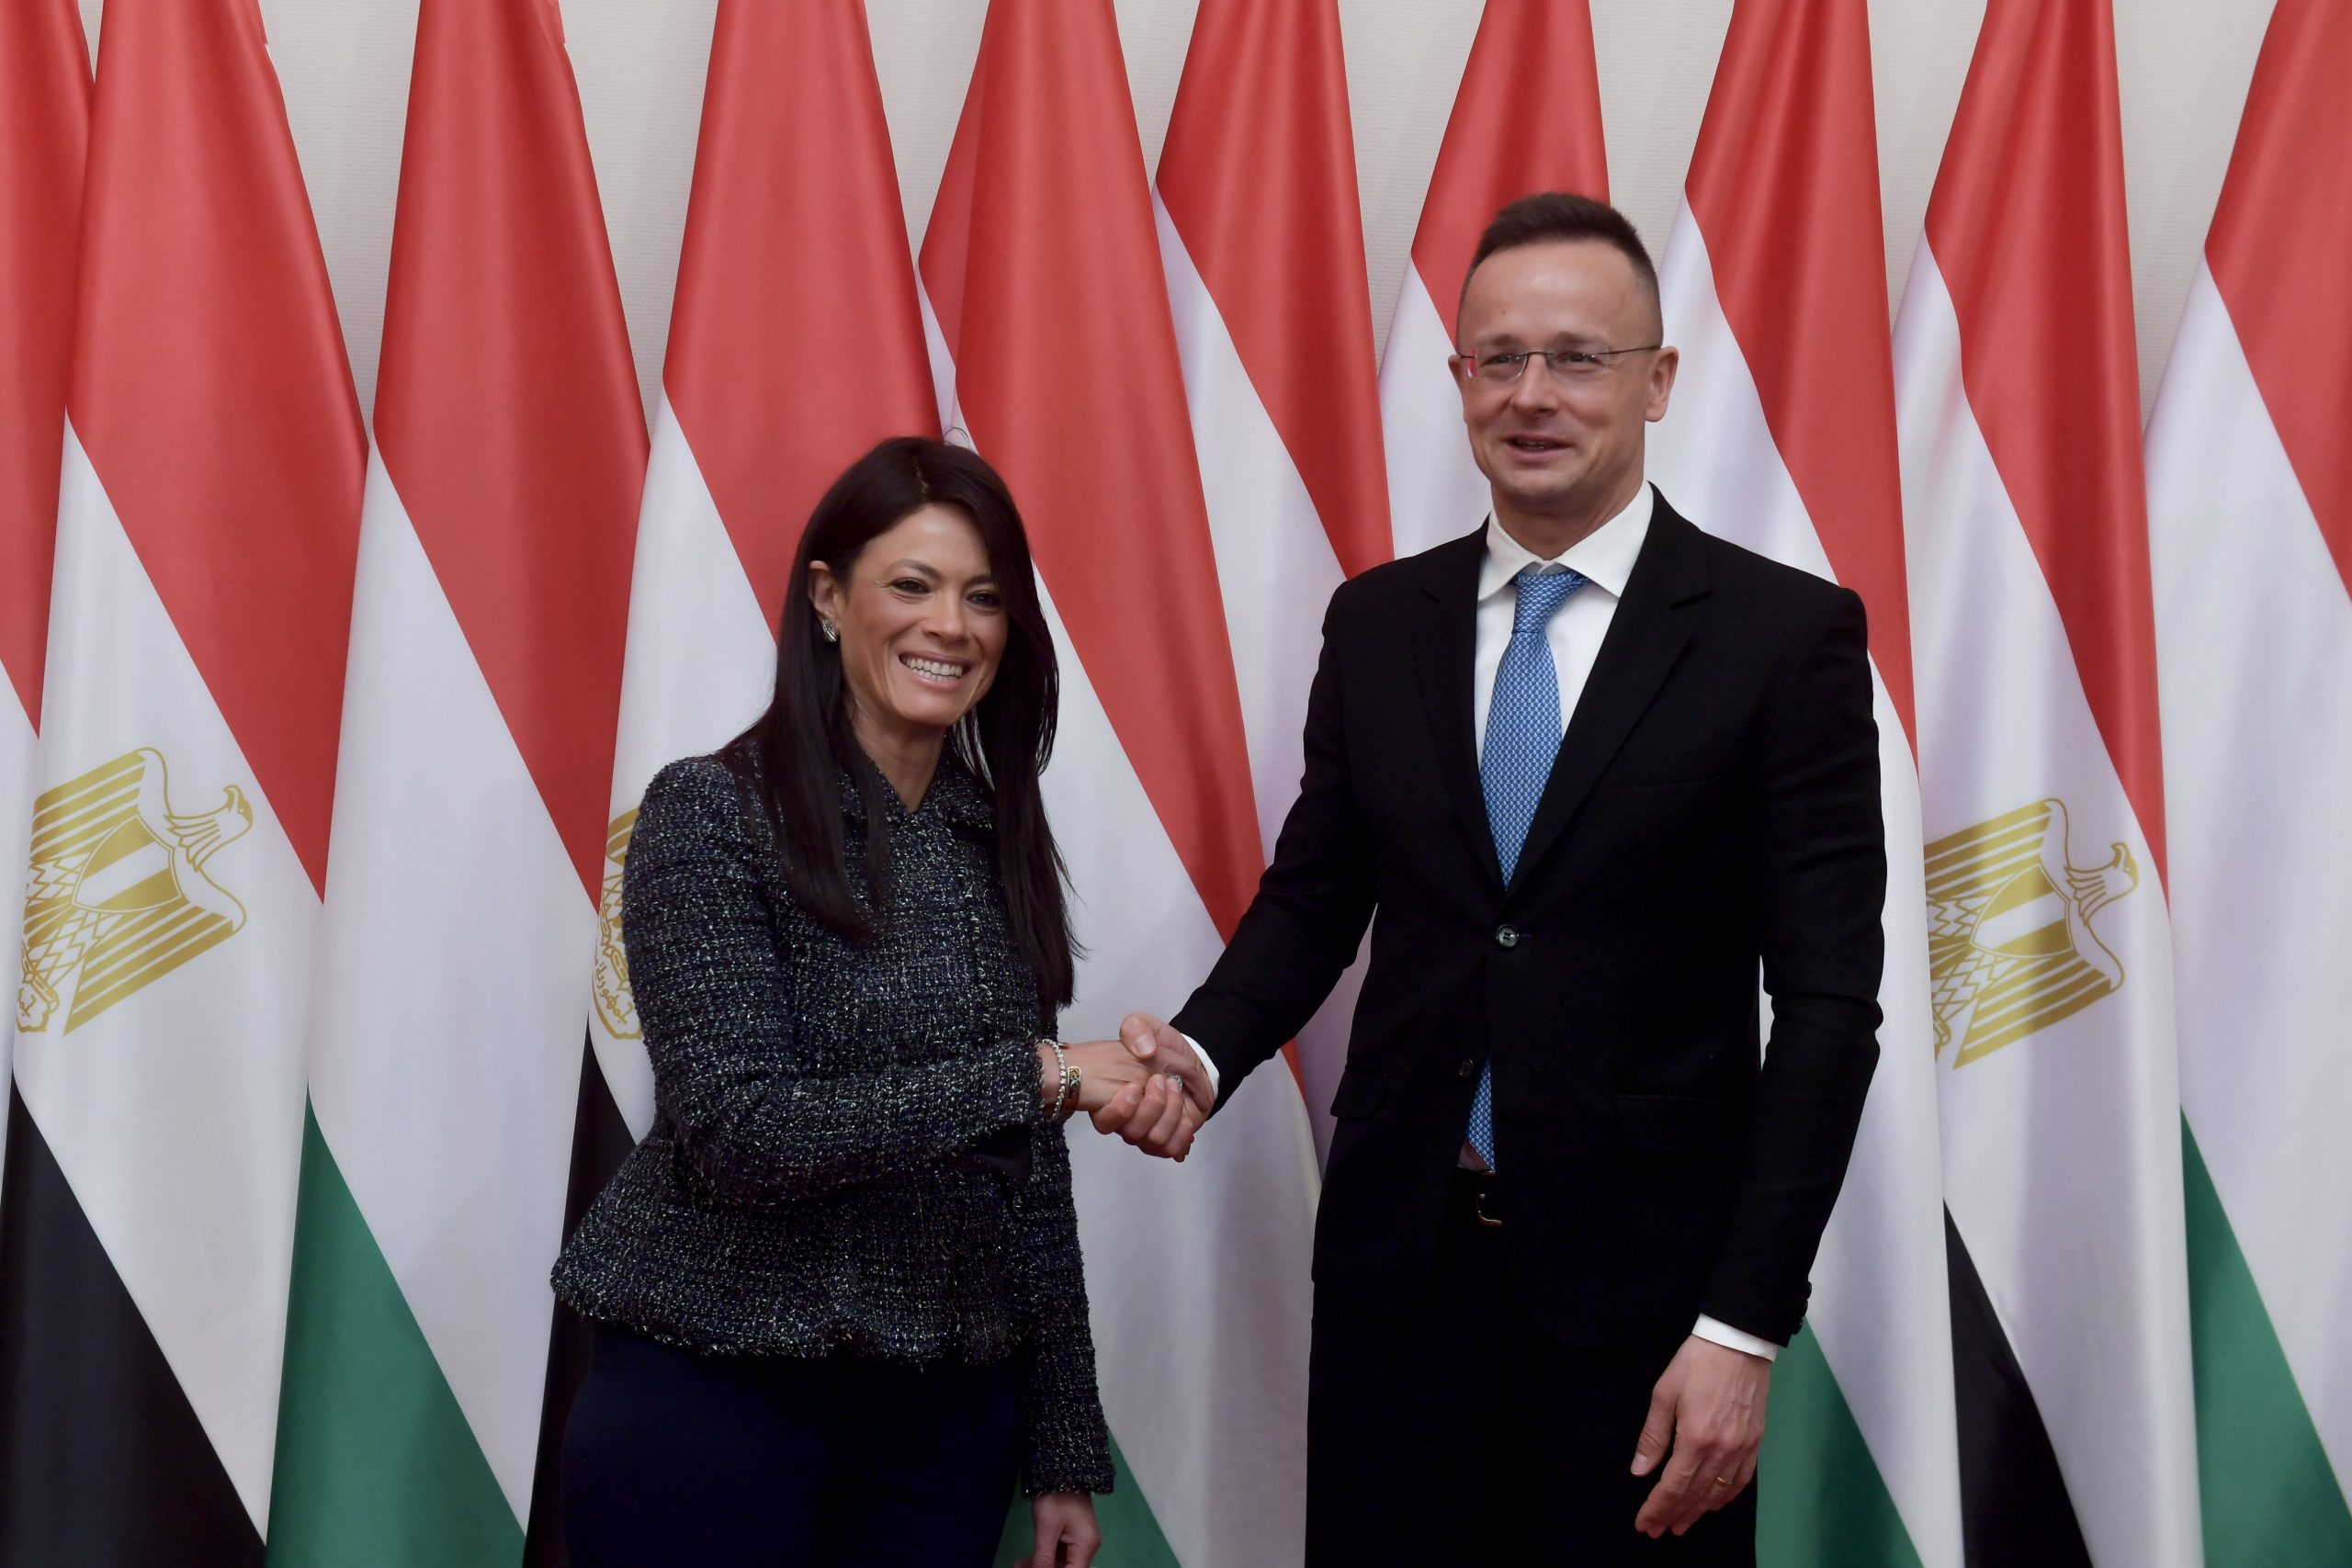 Further Success in Hungarian-Egyptian Economic Relations